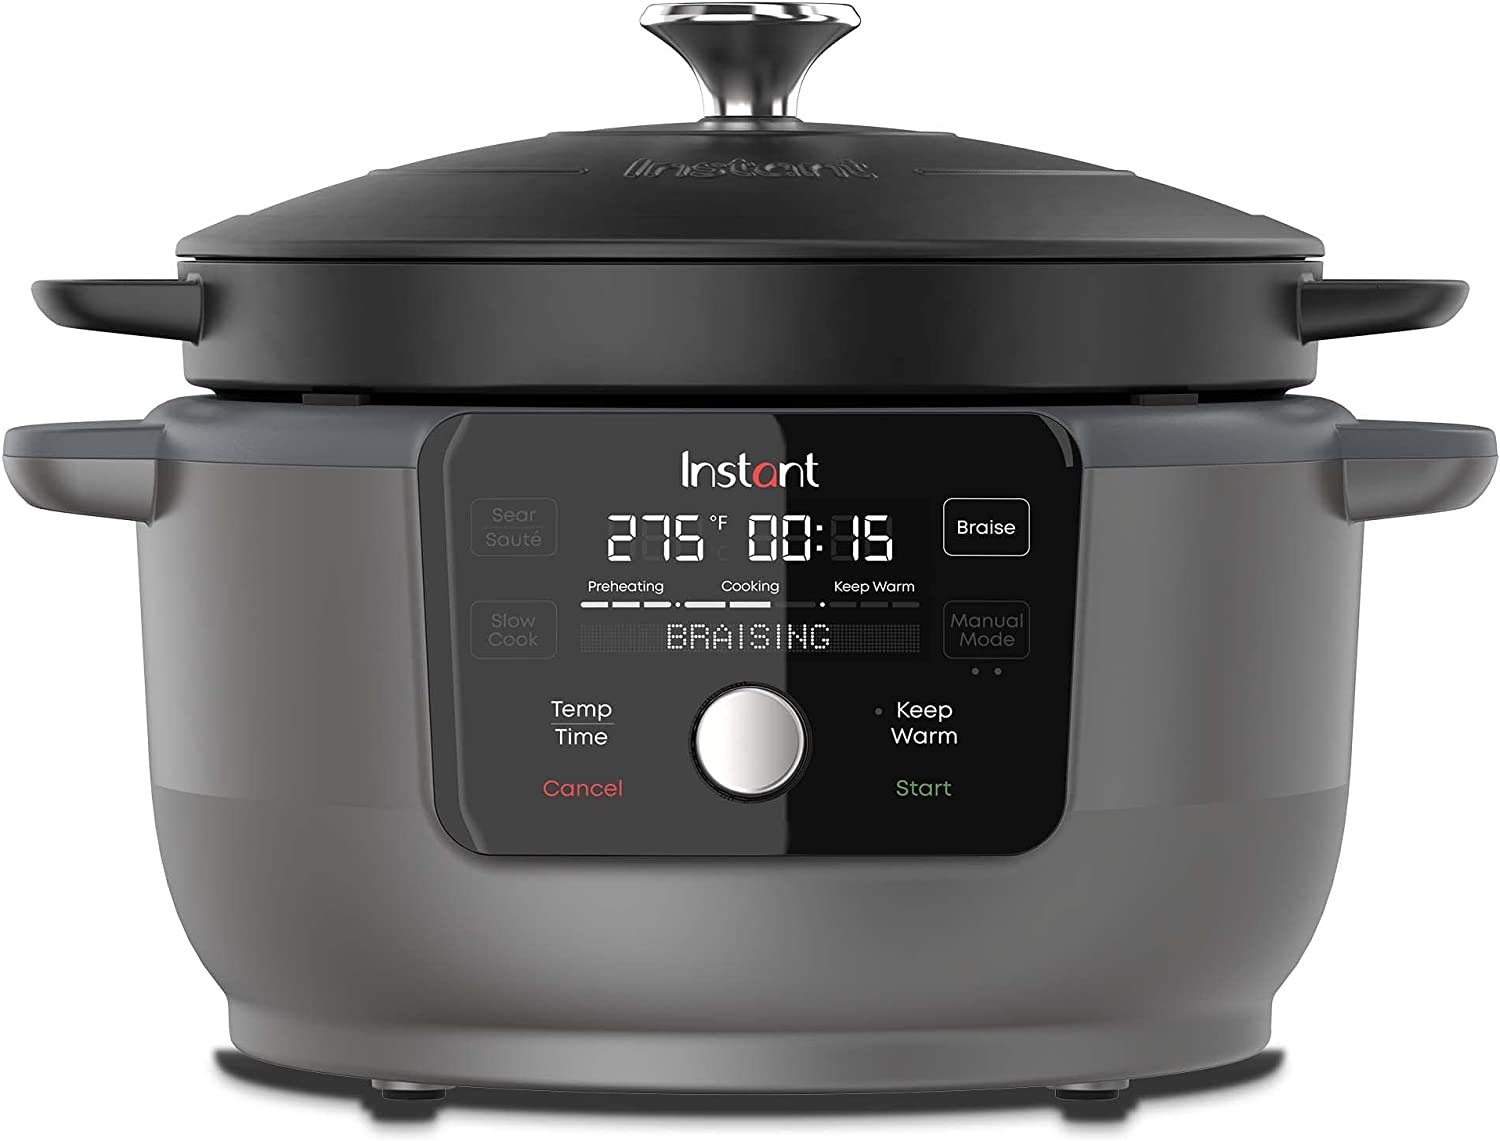 The Best Electric Dutch Ovens | The Smart Slow Cooker